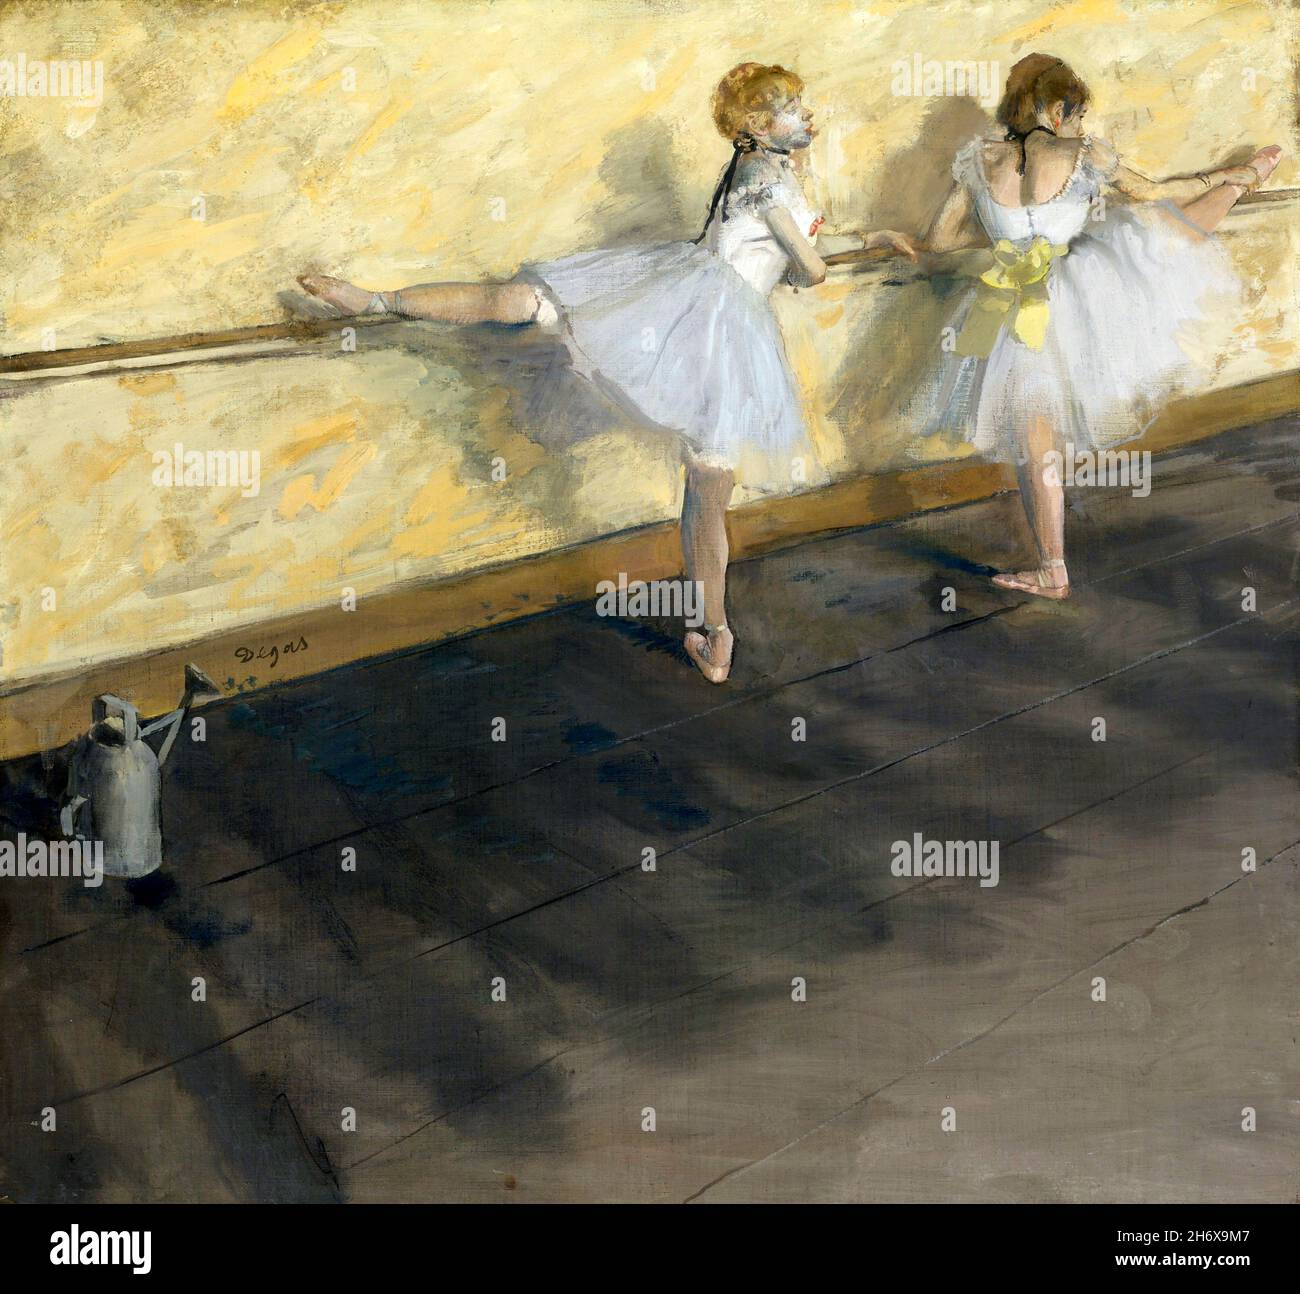 Degas. Painting entitled 'Dancers Practicing at the Barre' by Edgar Degas (1834-1917), oil on canvas, 1877 Stock Photo